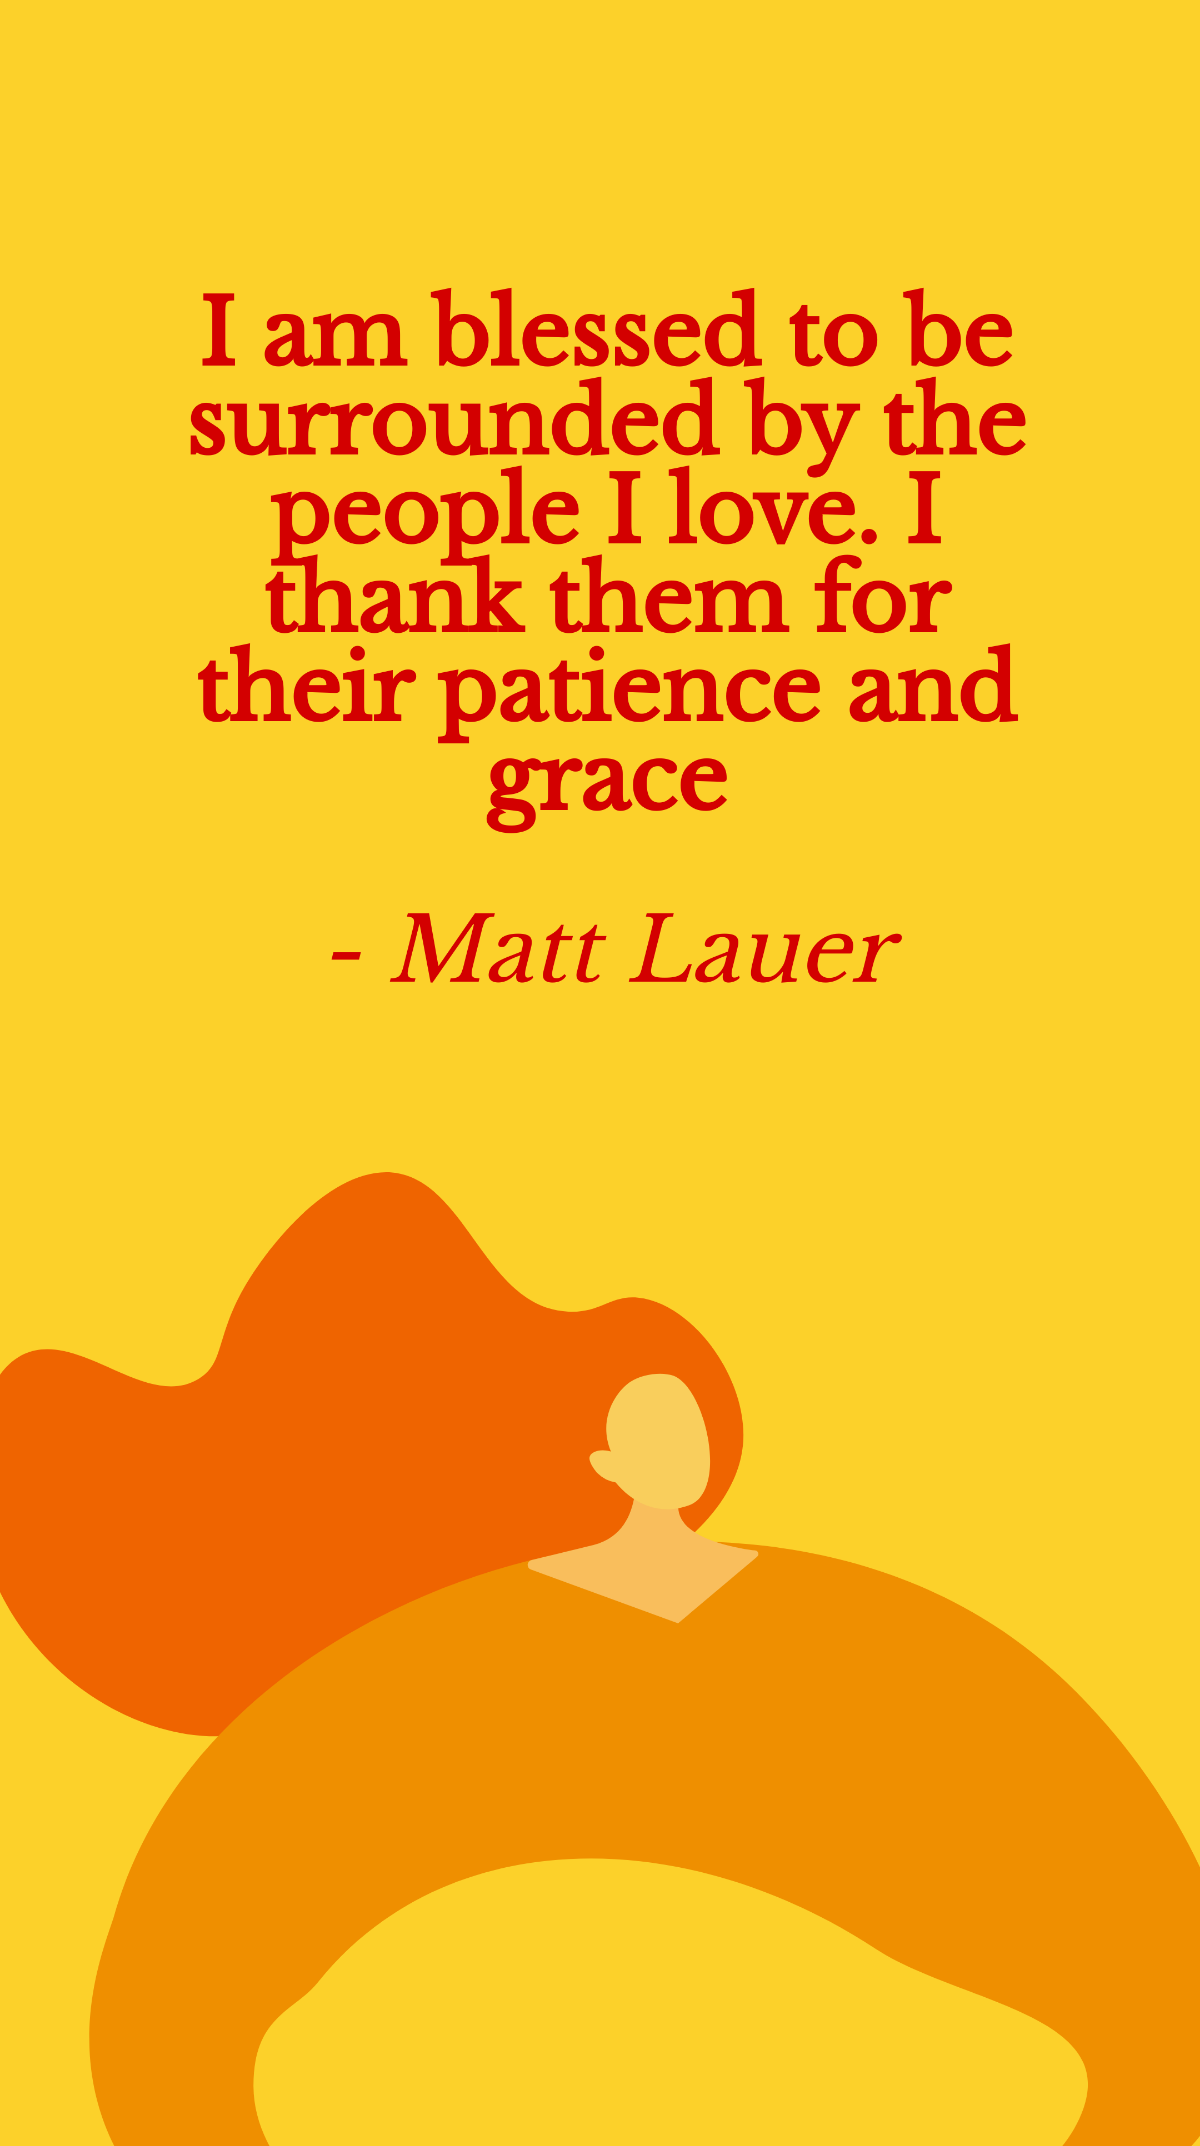 Free Matt Lauer - I am blessed to be surrounded by the people I love. I thank them for their patience and grace Template